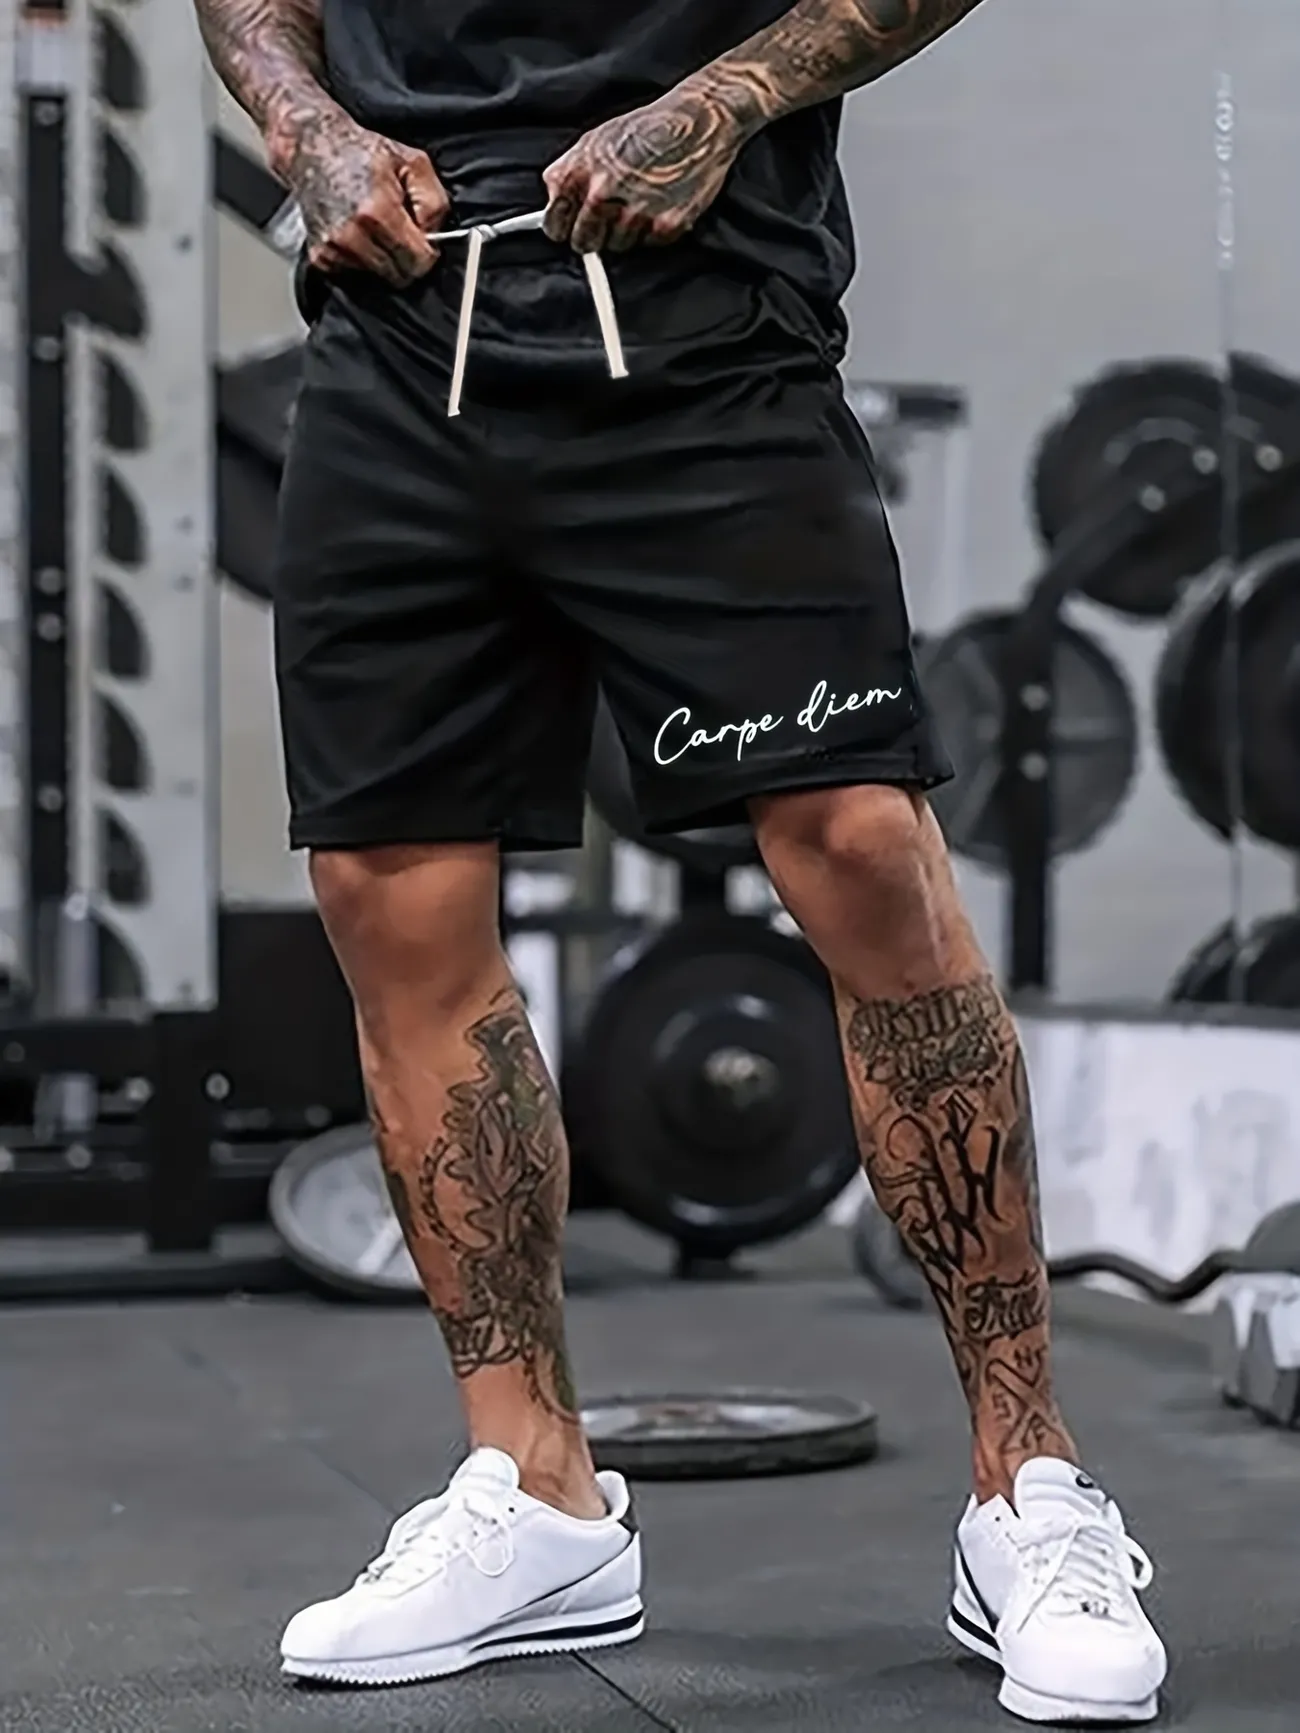 streetwear shorts outfit